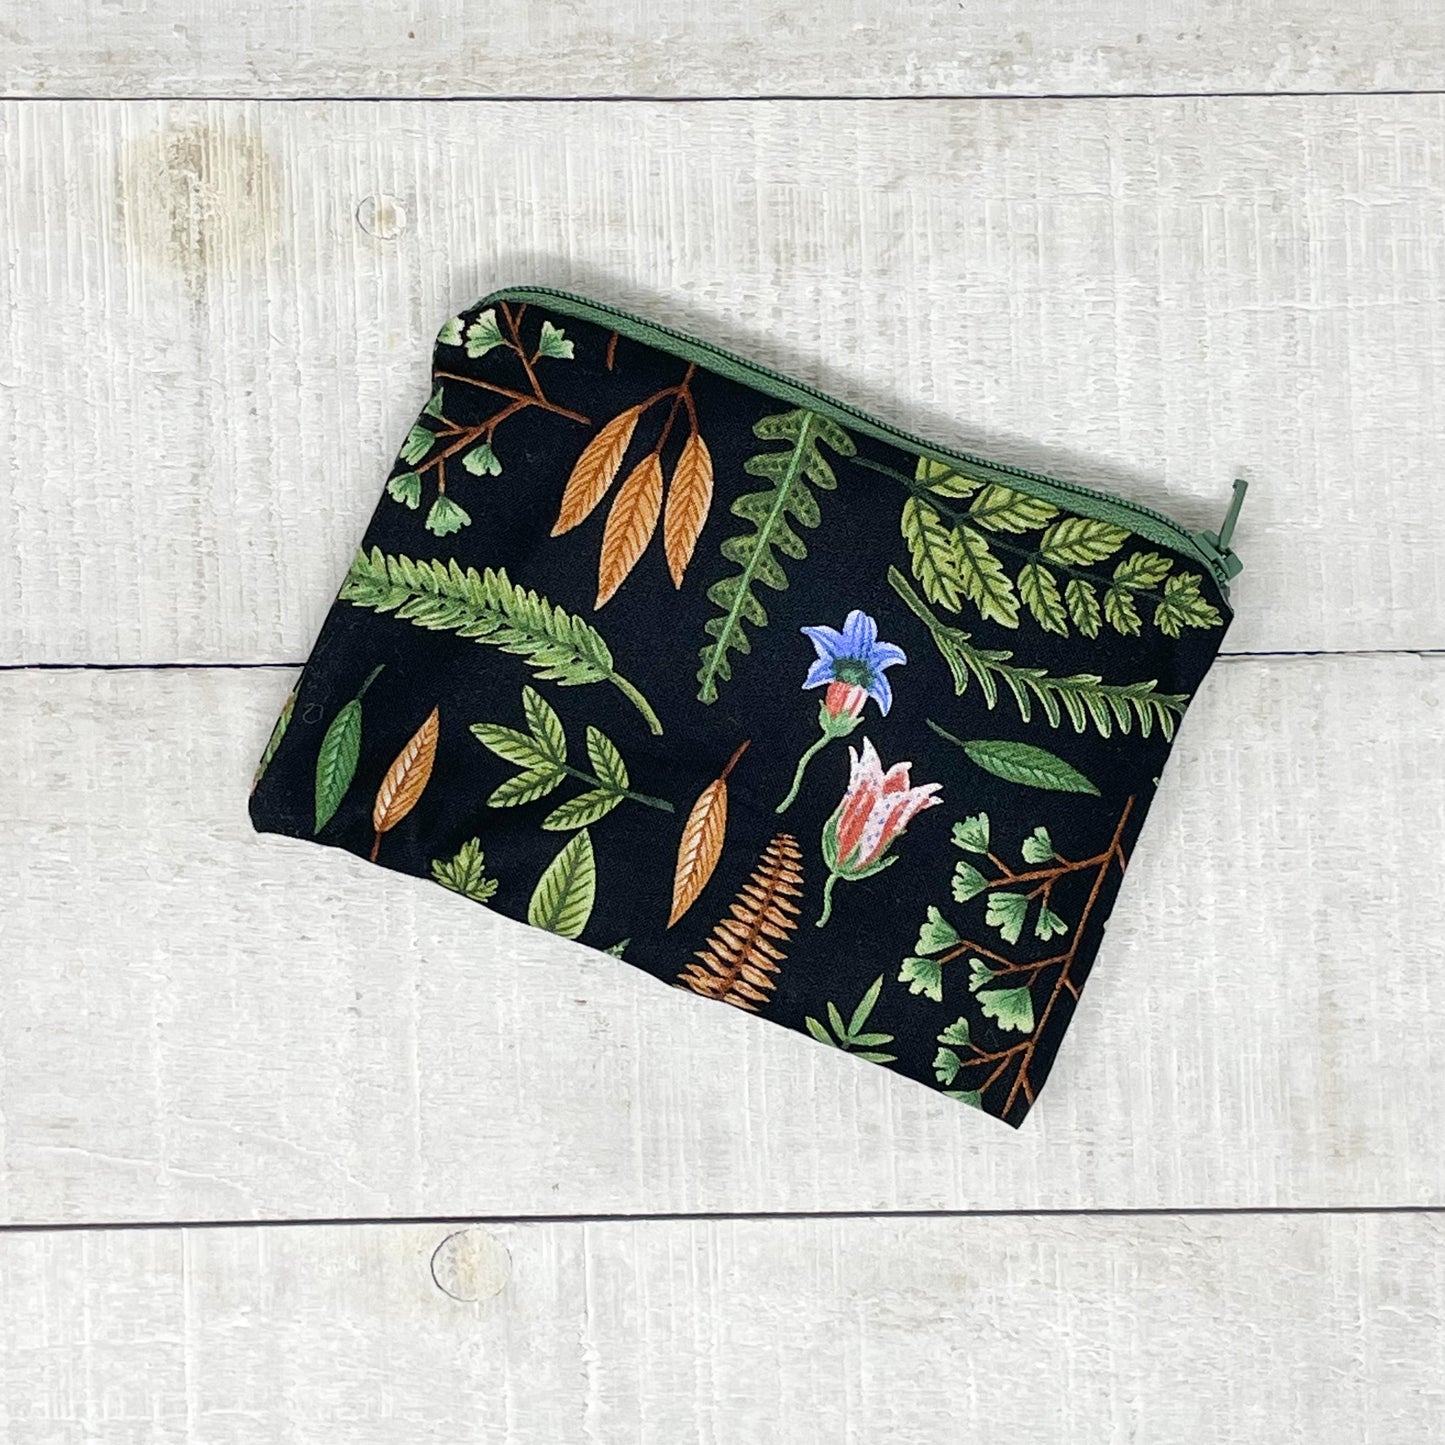 Small Snack Bag - Ferns